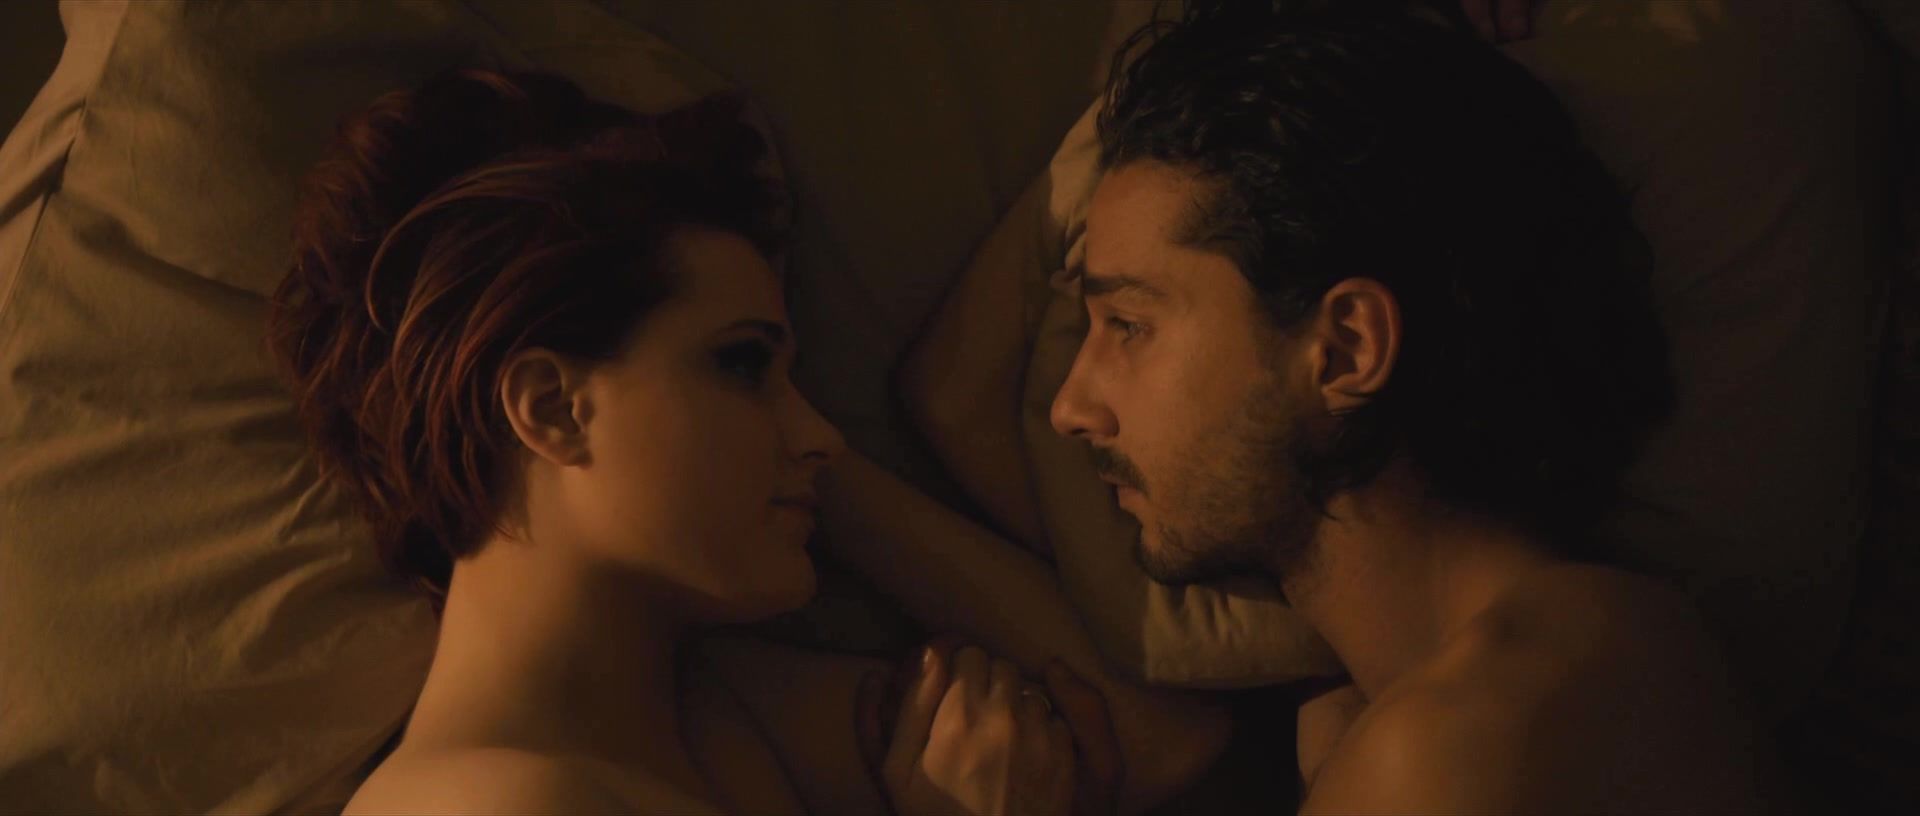 PervClips Sex video Evan Rachel Wood nude - The Necessary Death of Charlie Countryman (2013) Best Blowjobs